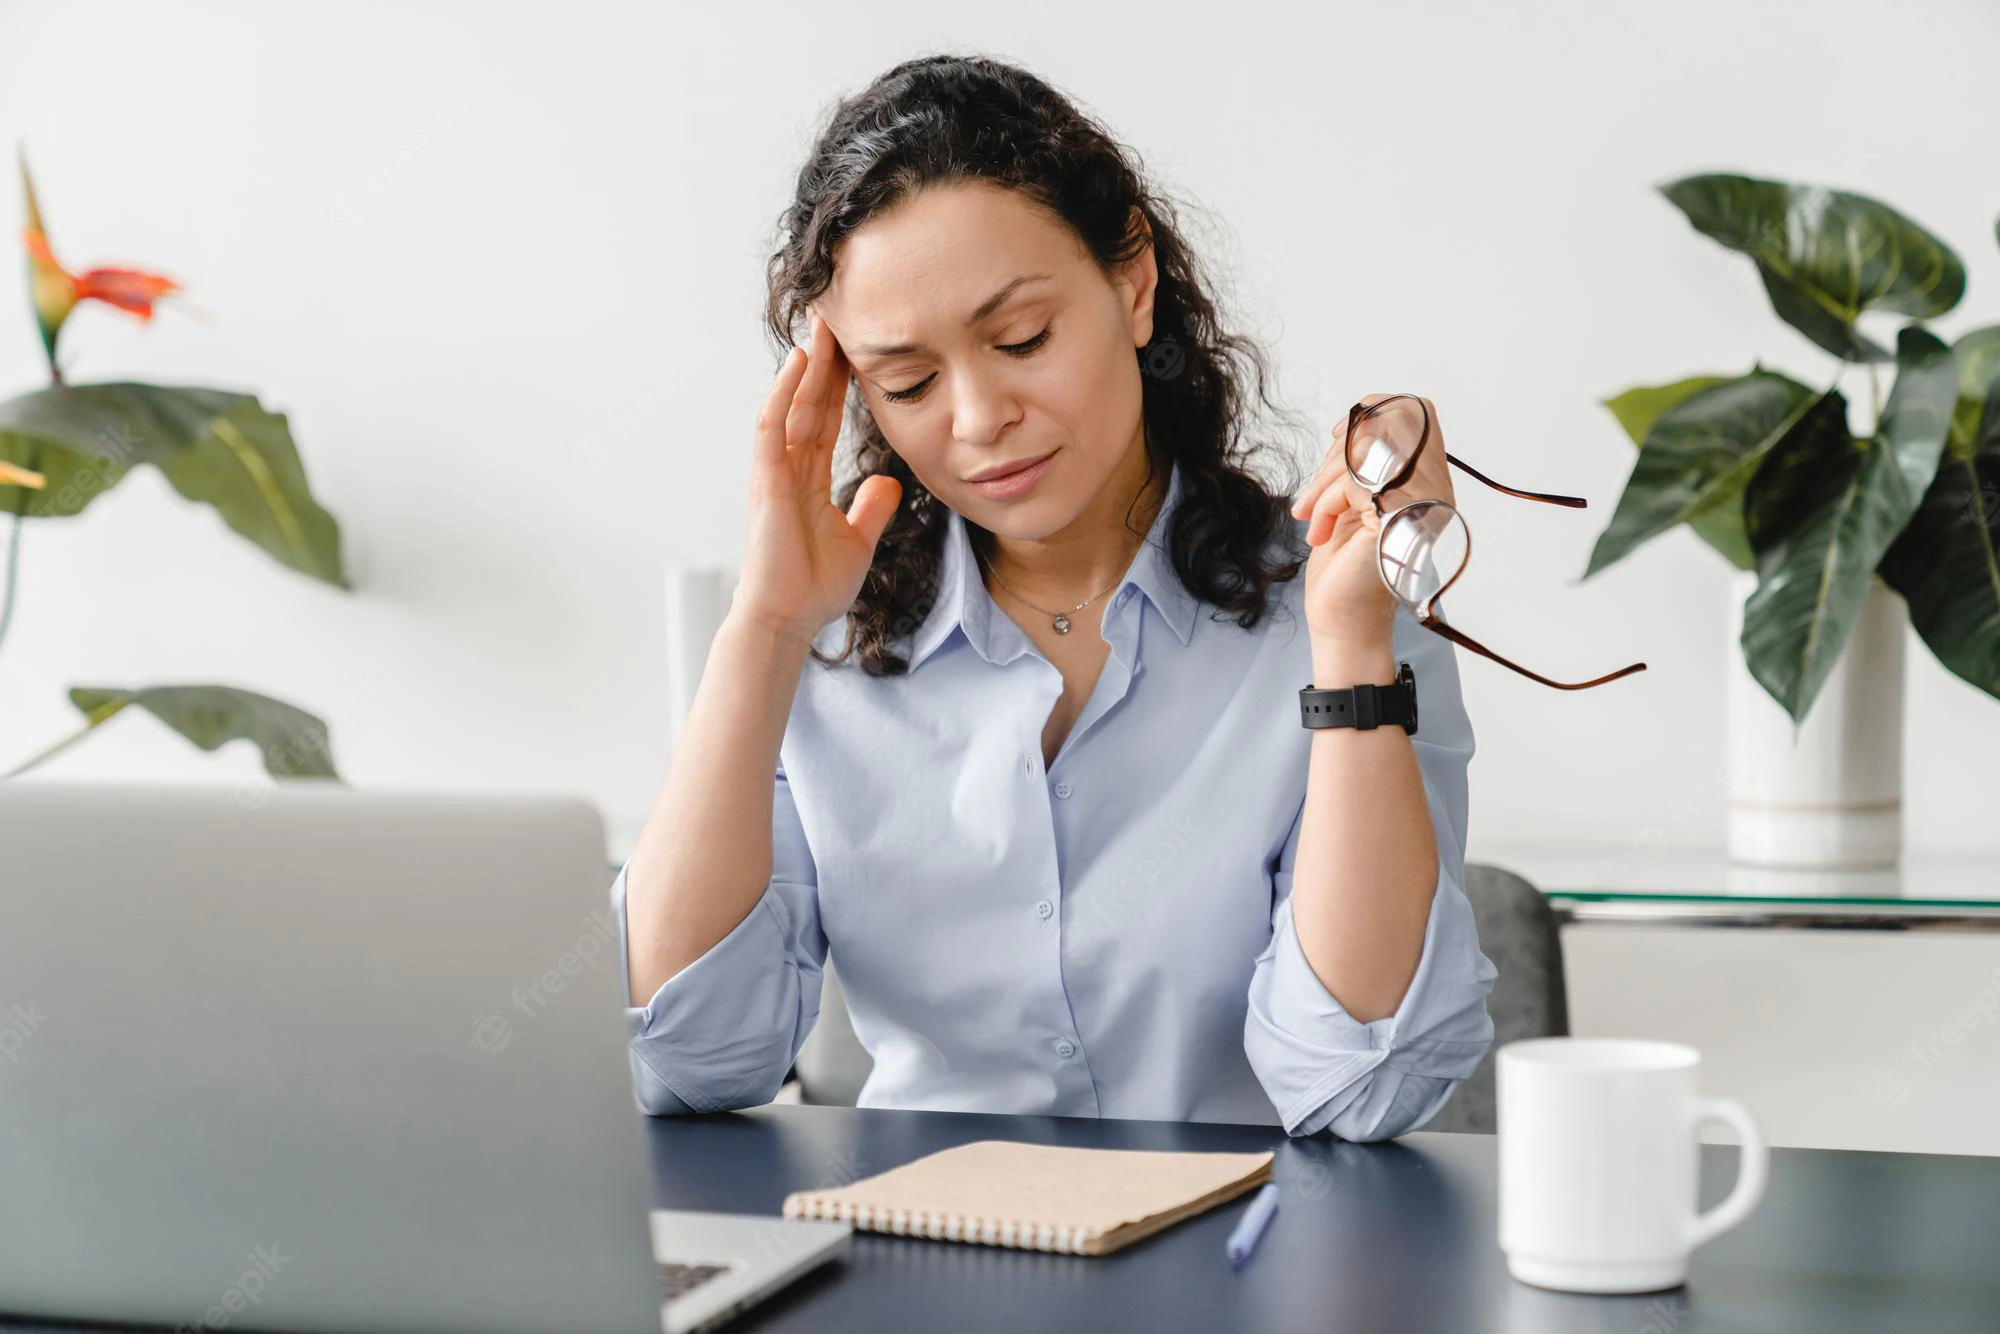 7 tips for managing menopause at work